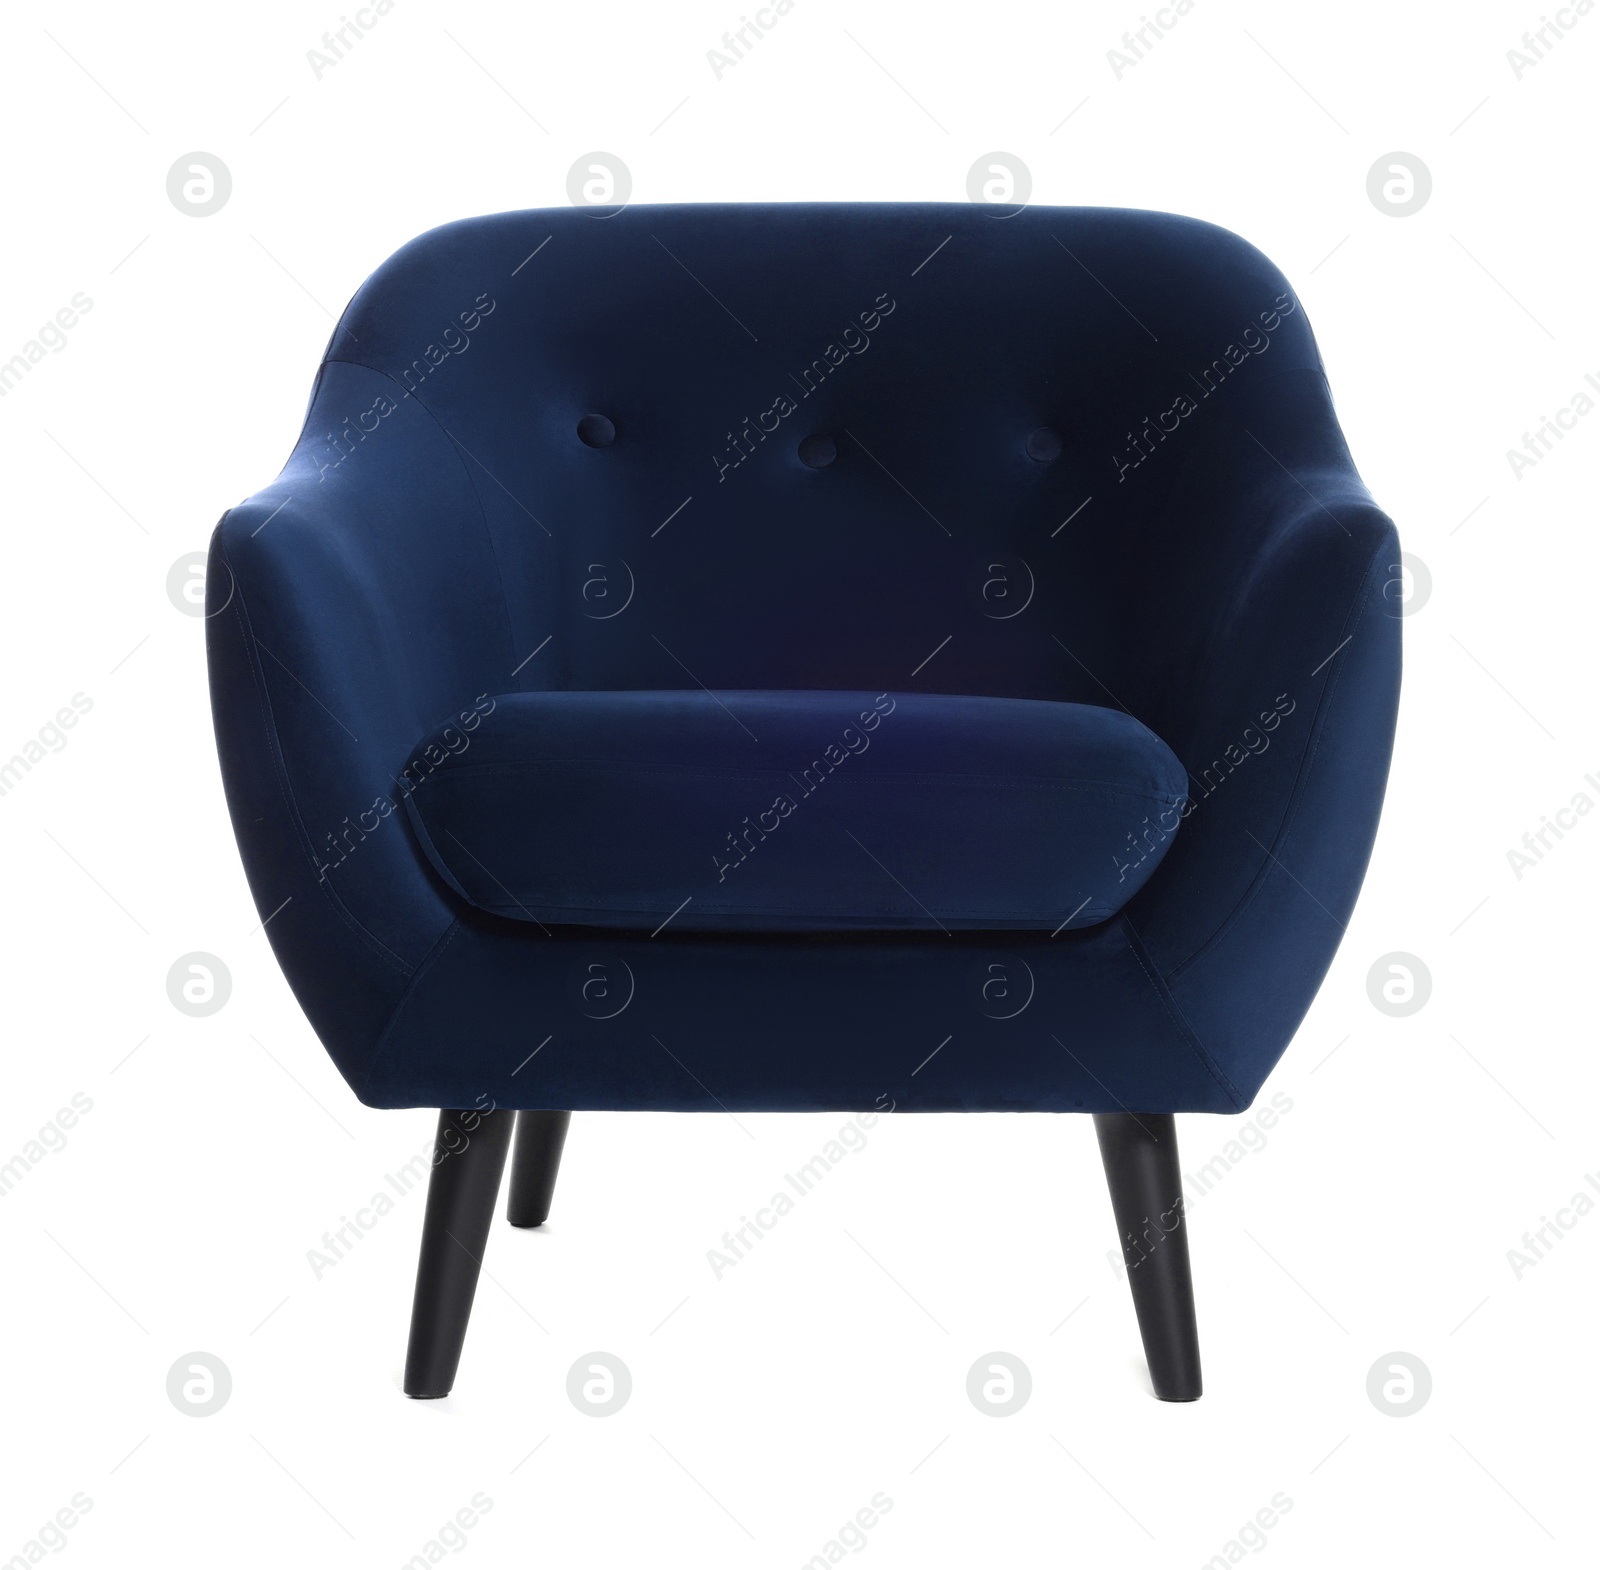 Image of One comfortable dark blue armchair isolated on white